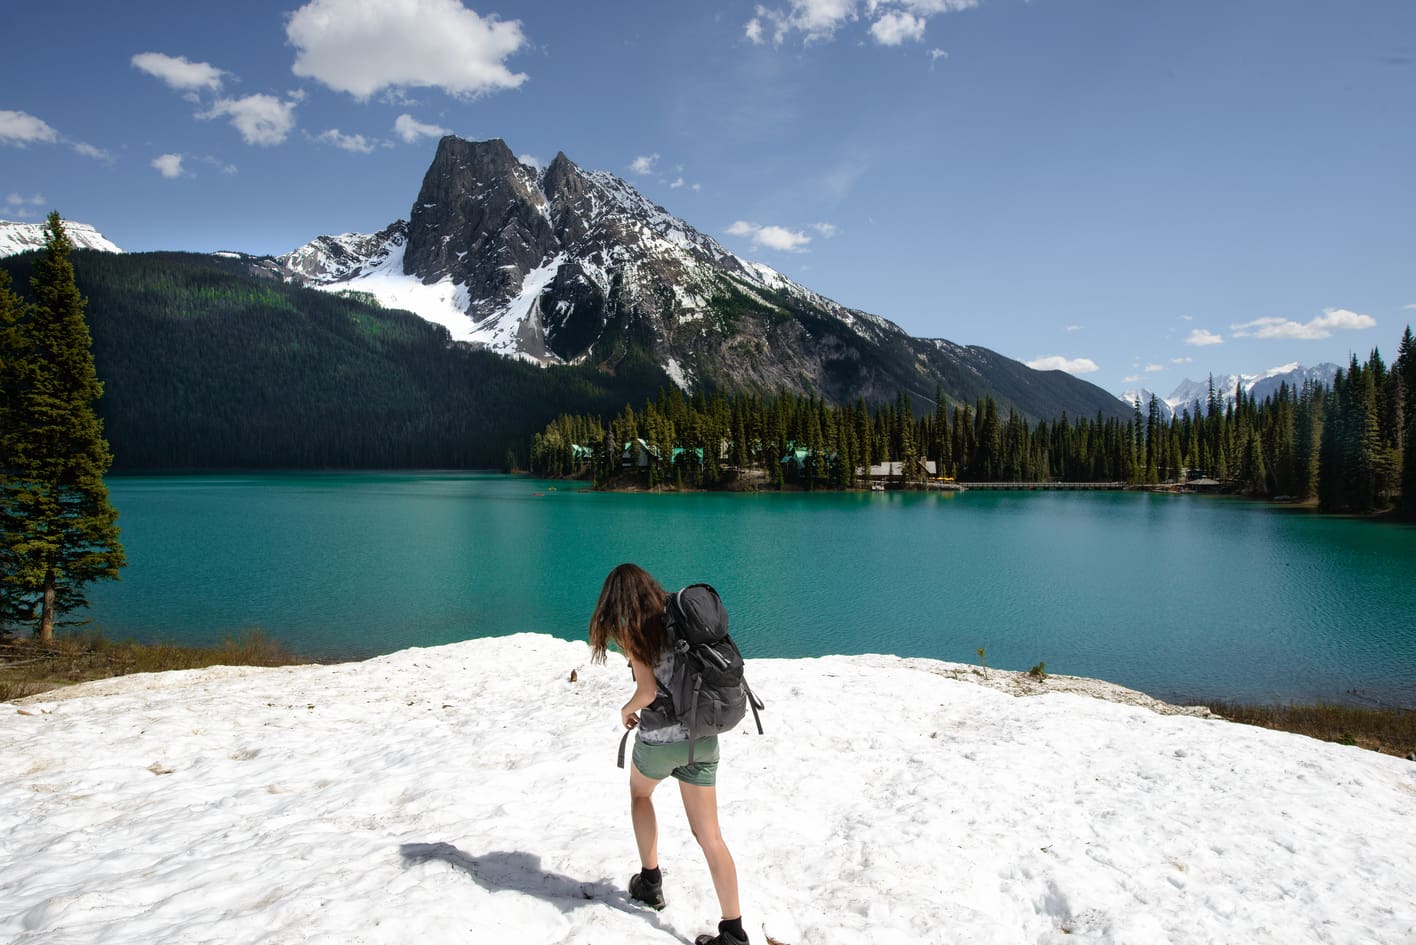 emerald lake in a day for backpackers canada yoho